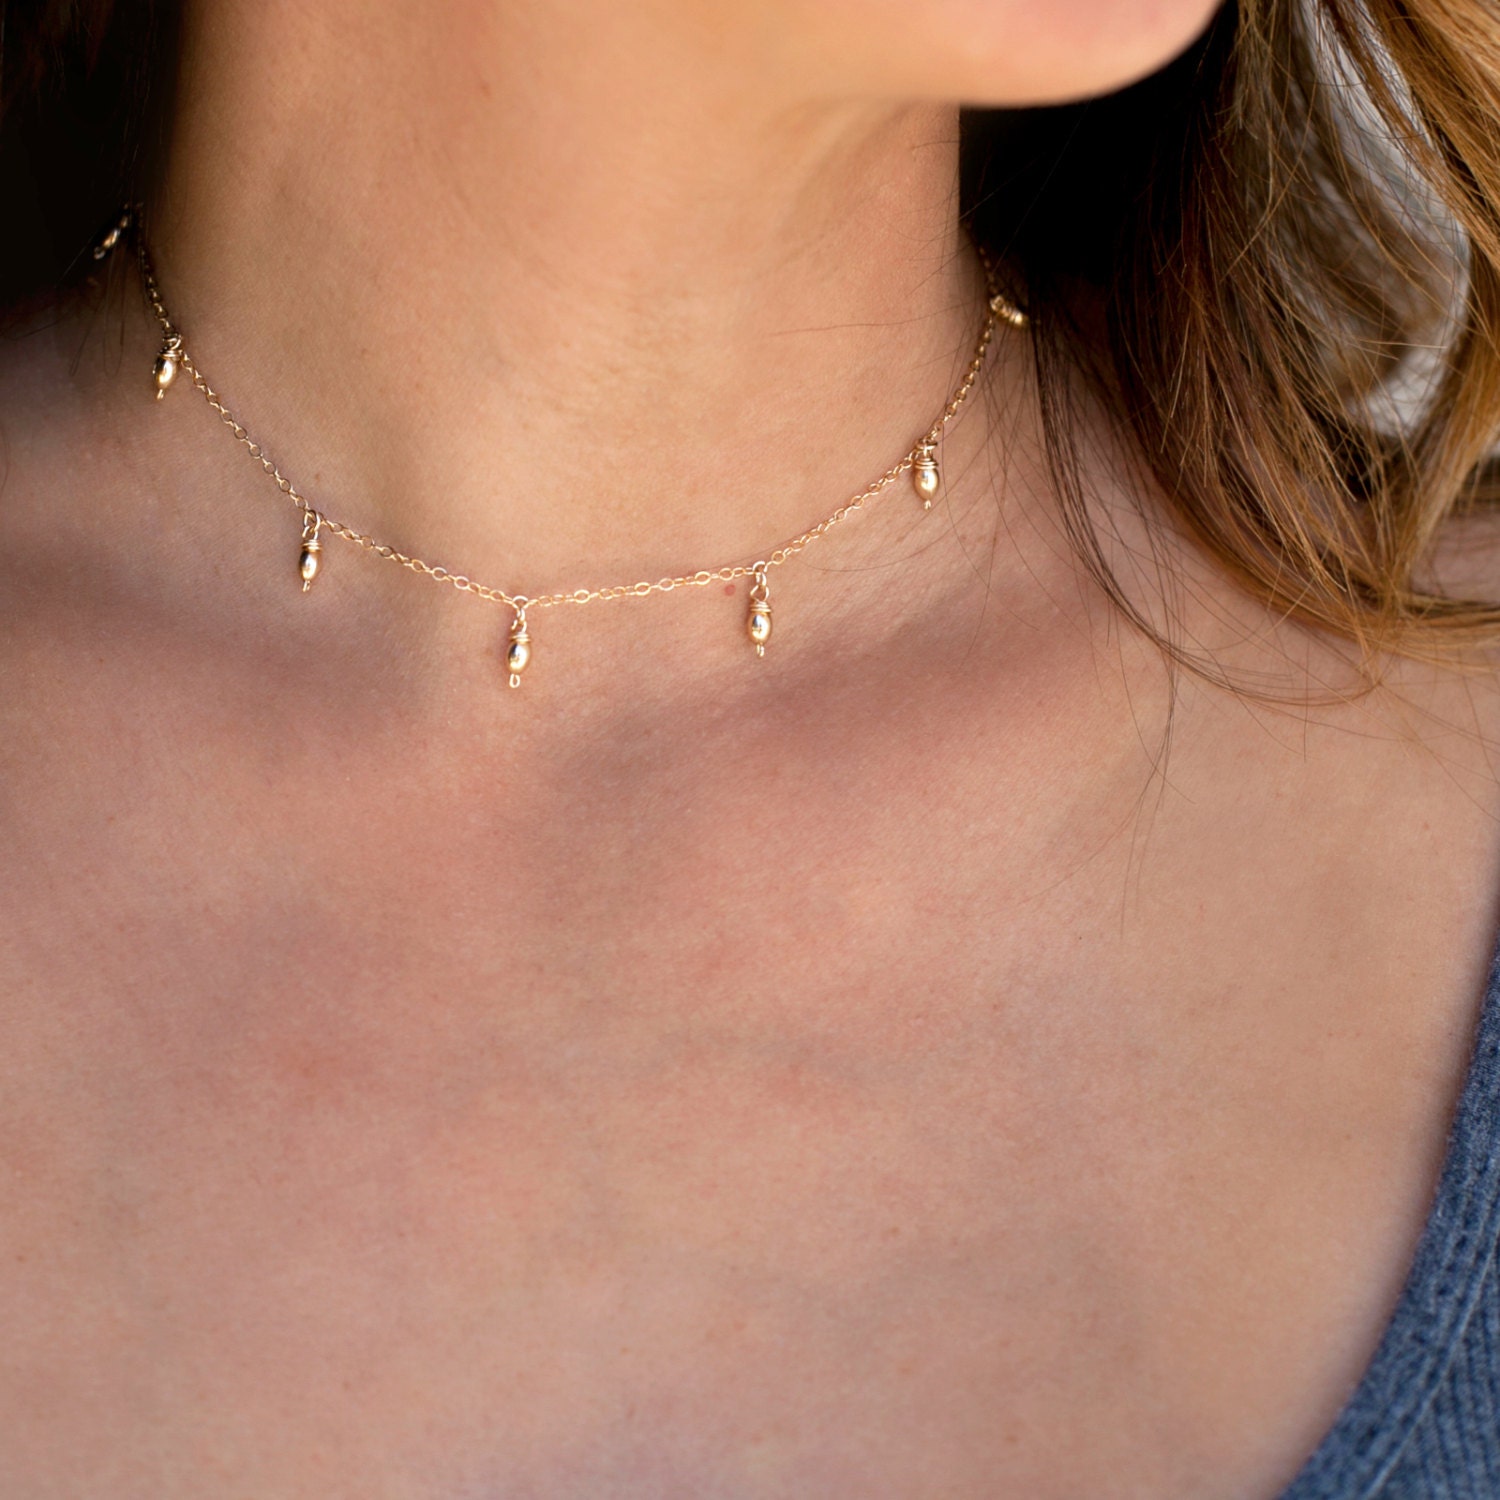 Pin by Lauren Weber on Accessories. | Delicate choker necklace, Beautiful  necklaces, Chokers